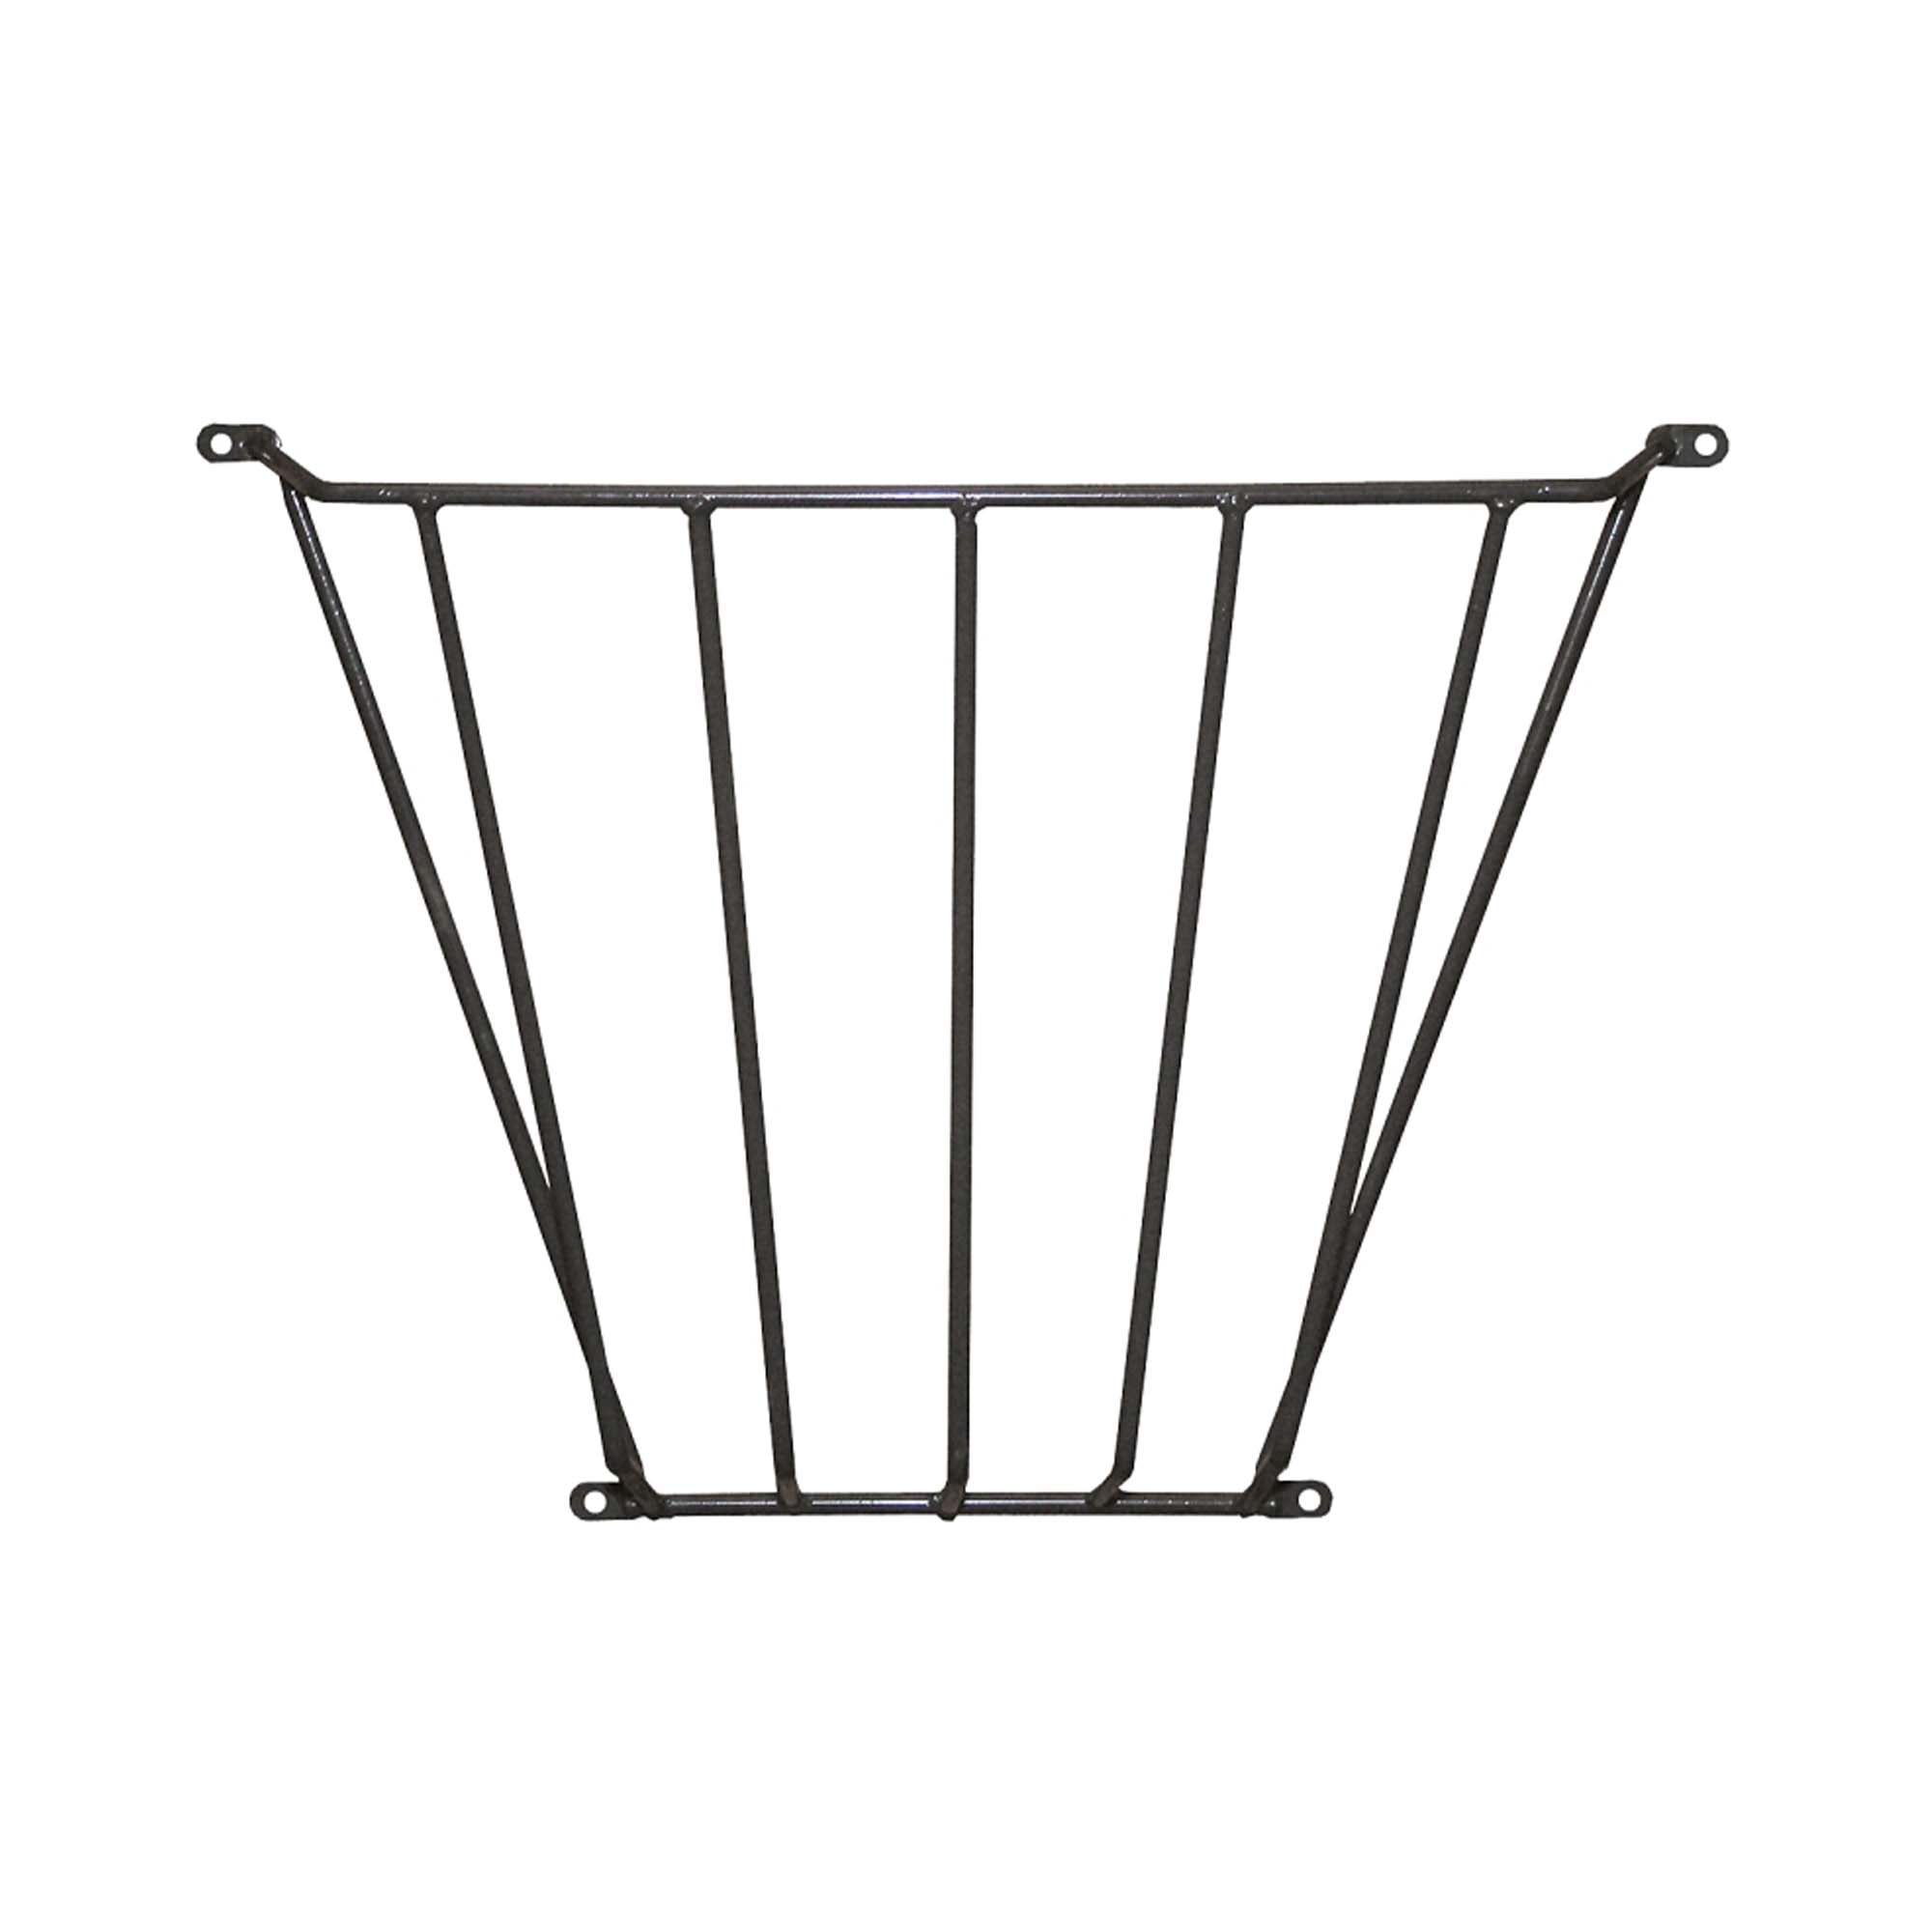 Wall mounted hay rack, solid steel - Behlen Country